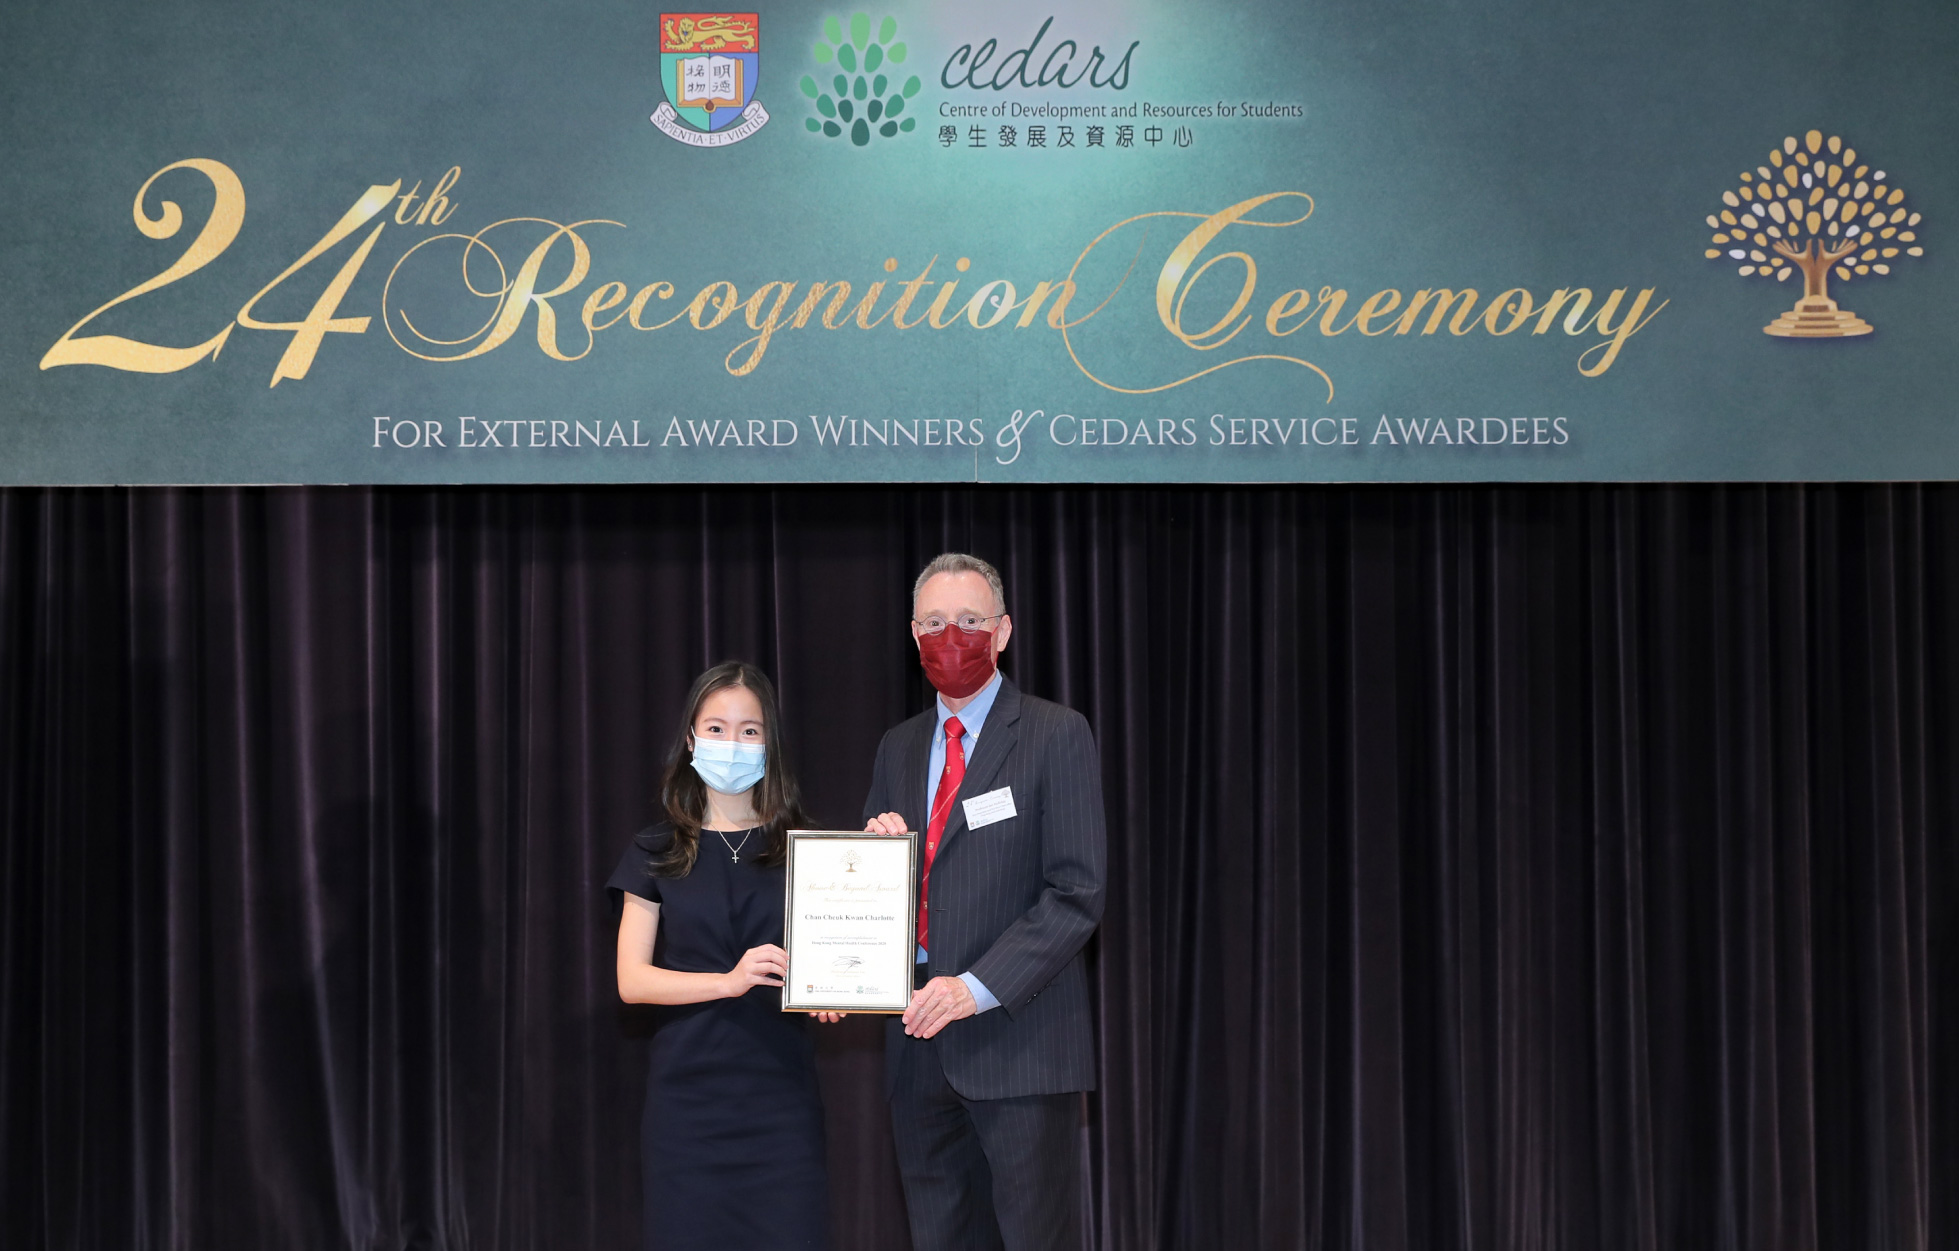 Charlotte Chan receives the “Above and Beyond Award” from Professor Ian Holliday (Vice-President and Pro-Vice-Chancellor (Teaching and Learning)) at the 24th Recognition Ceremony